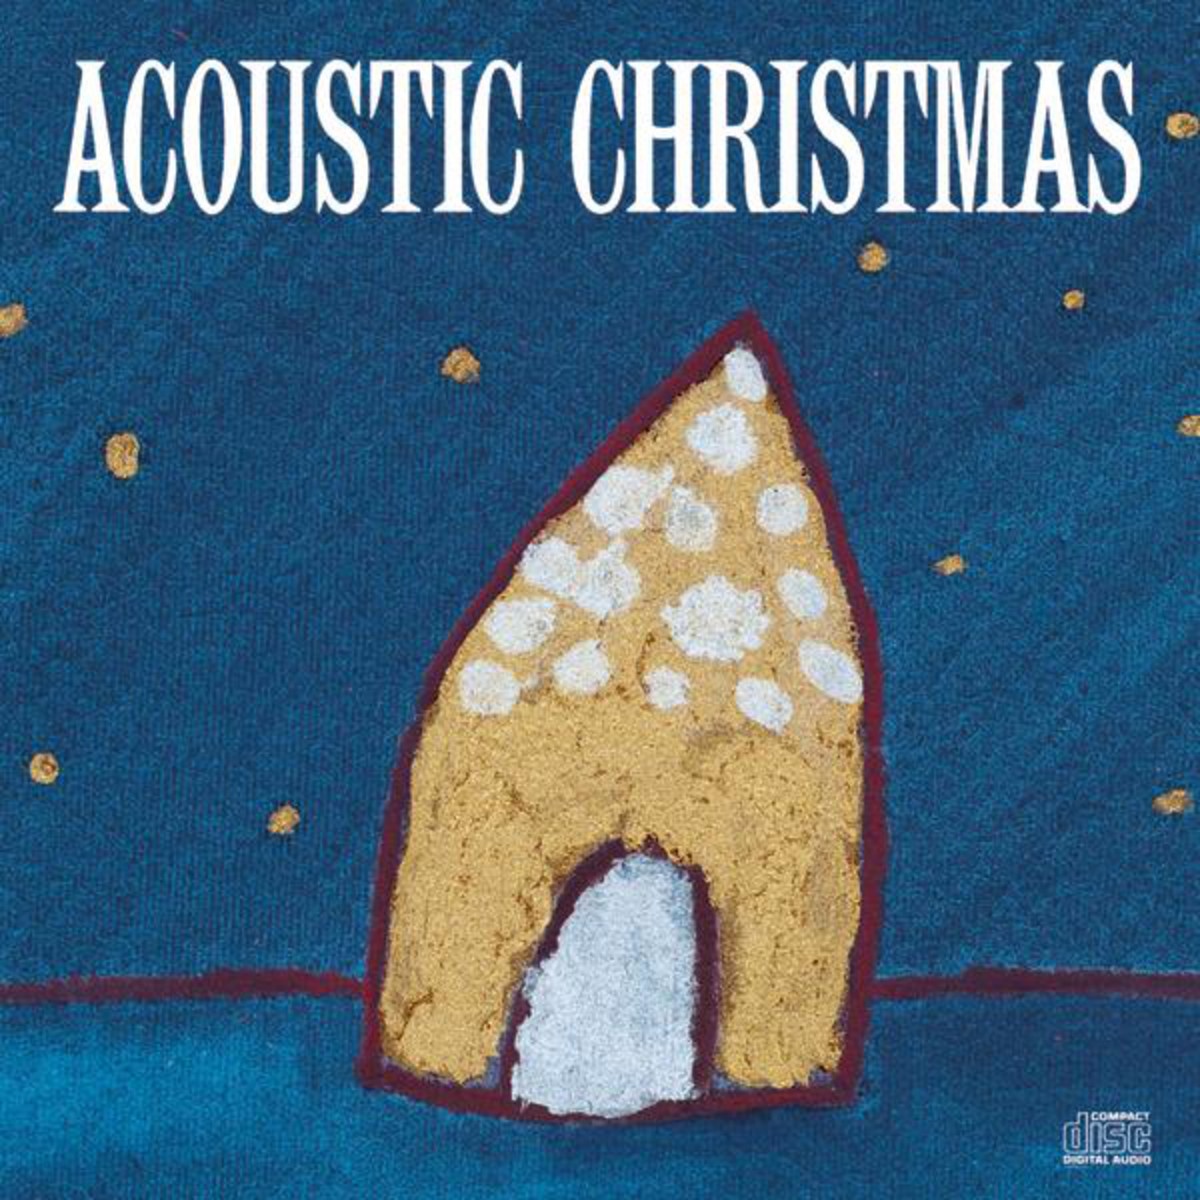 It Came Upon A Midnight Clear (Acoustic Christmas Album Version) - unplug